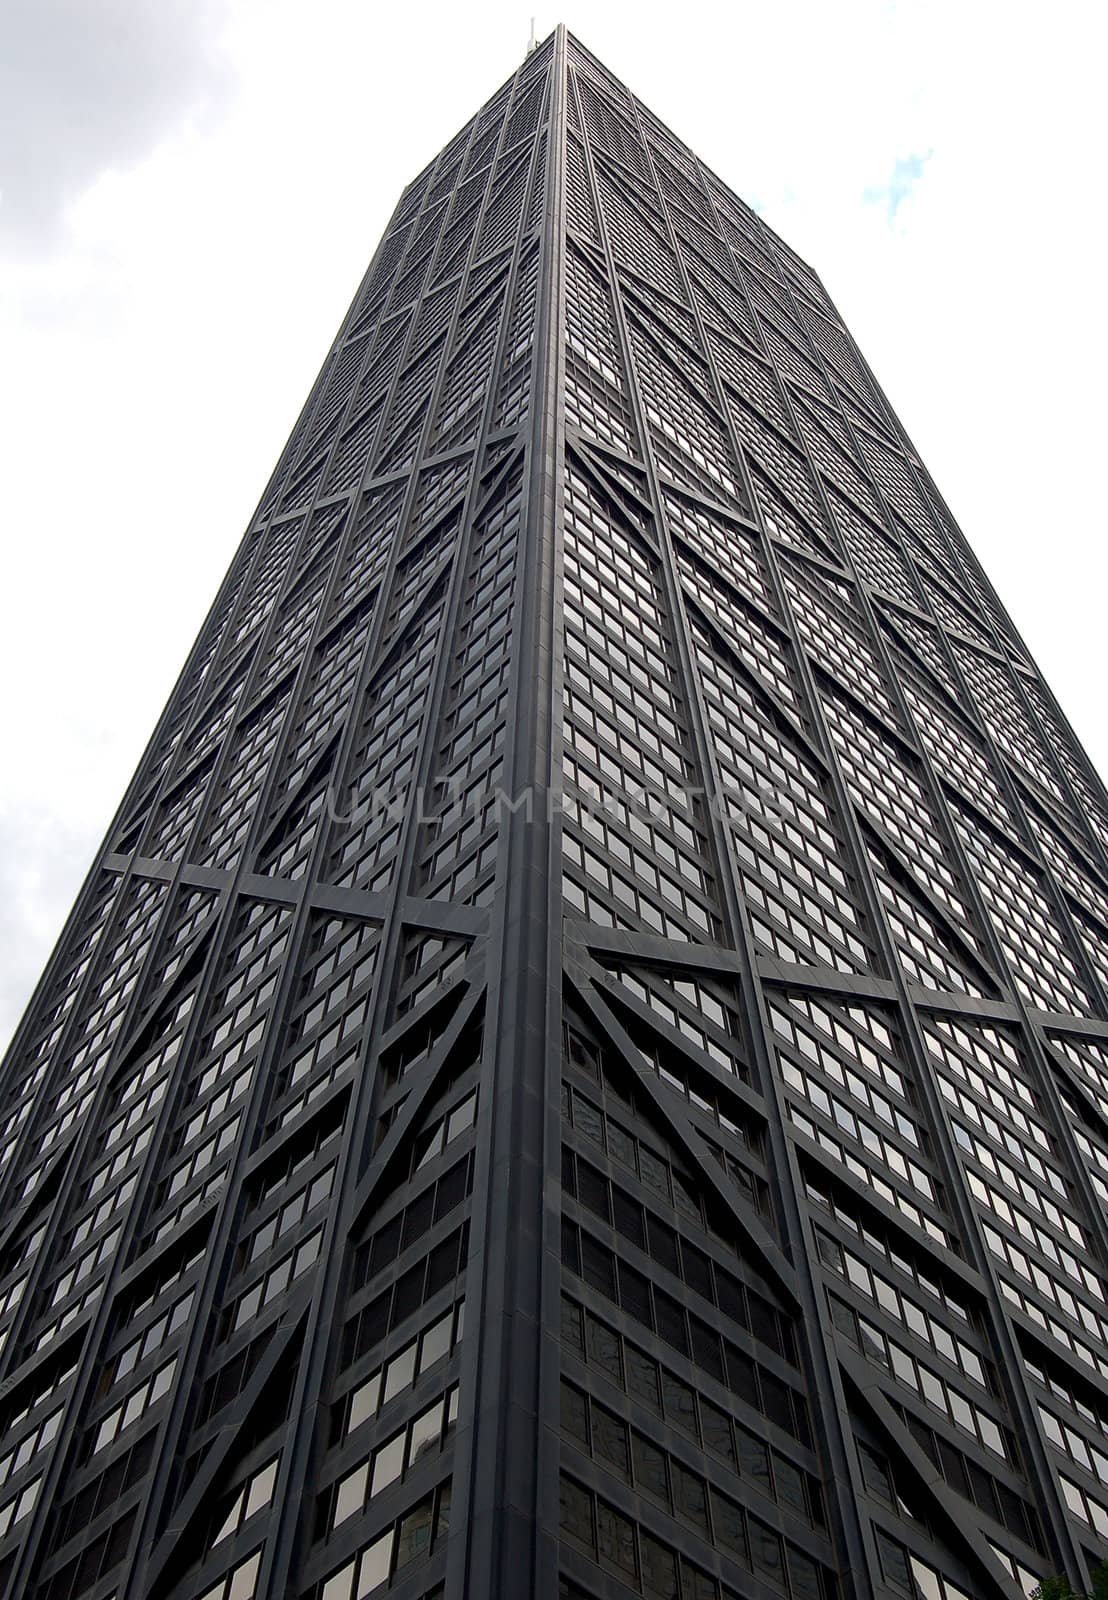 Picture of a very traditional American skyscrapper in Chicago